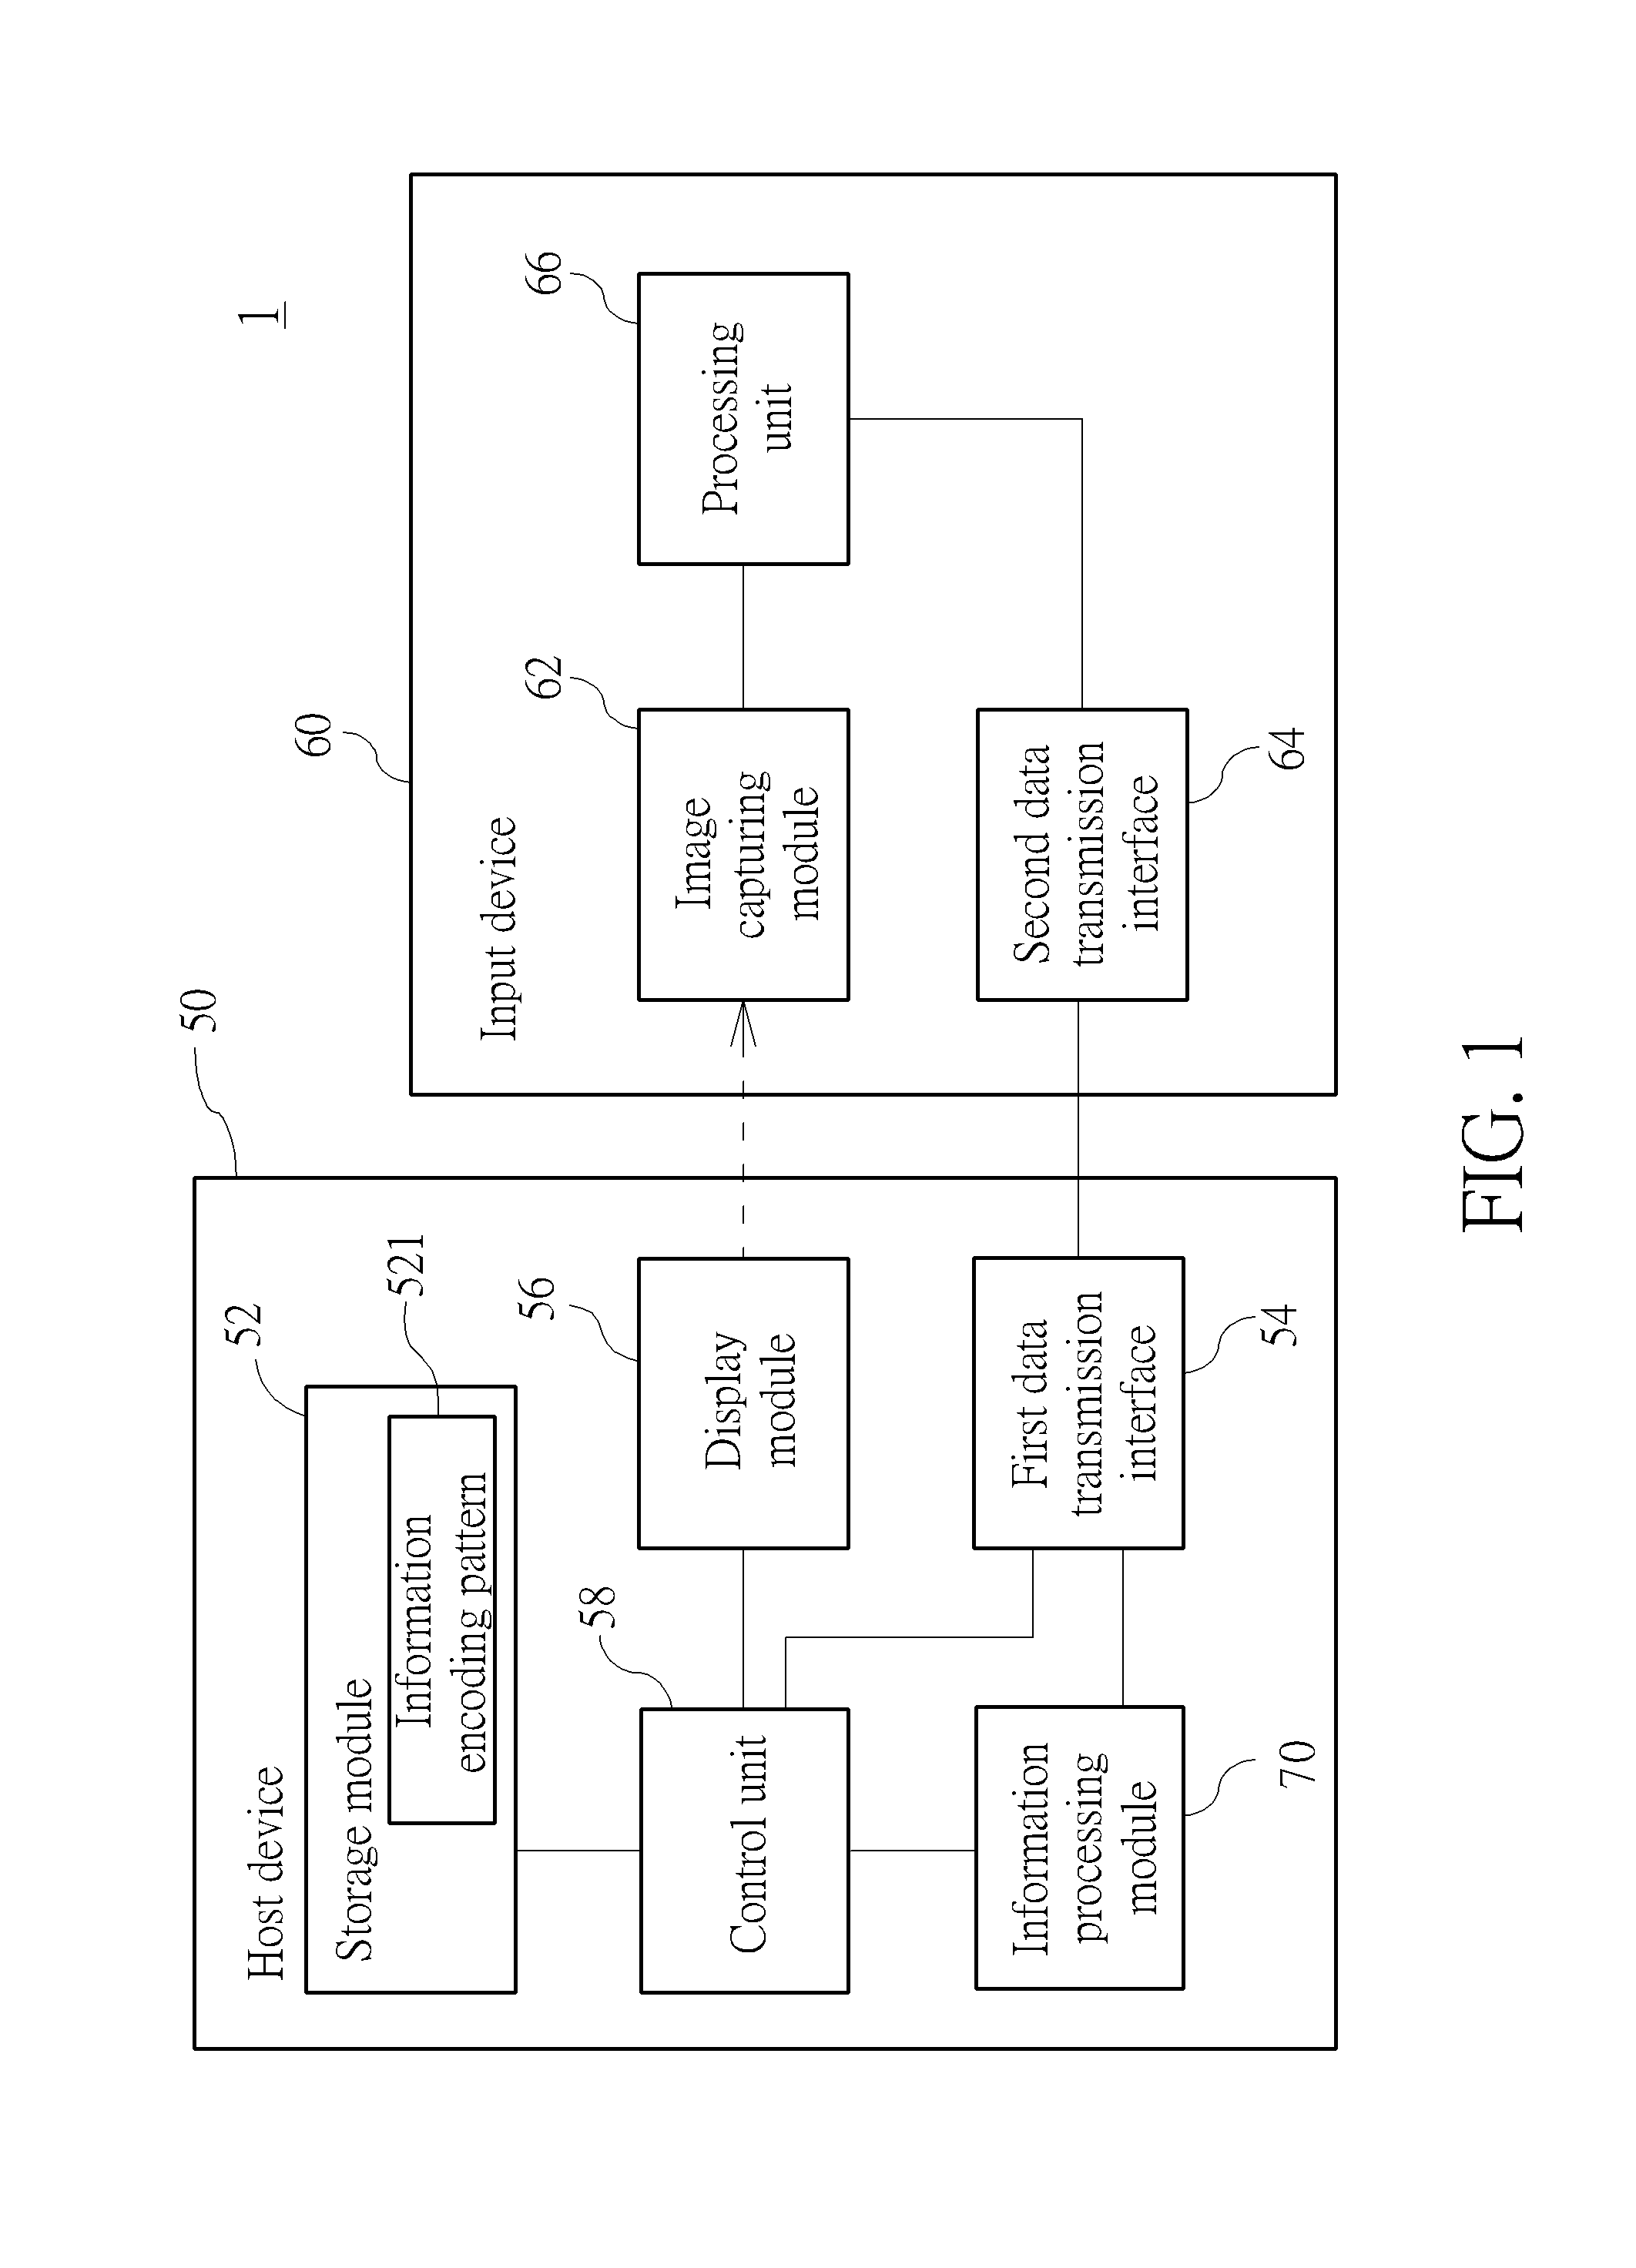 Image processing system for generating information by image recognition and related method